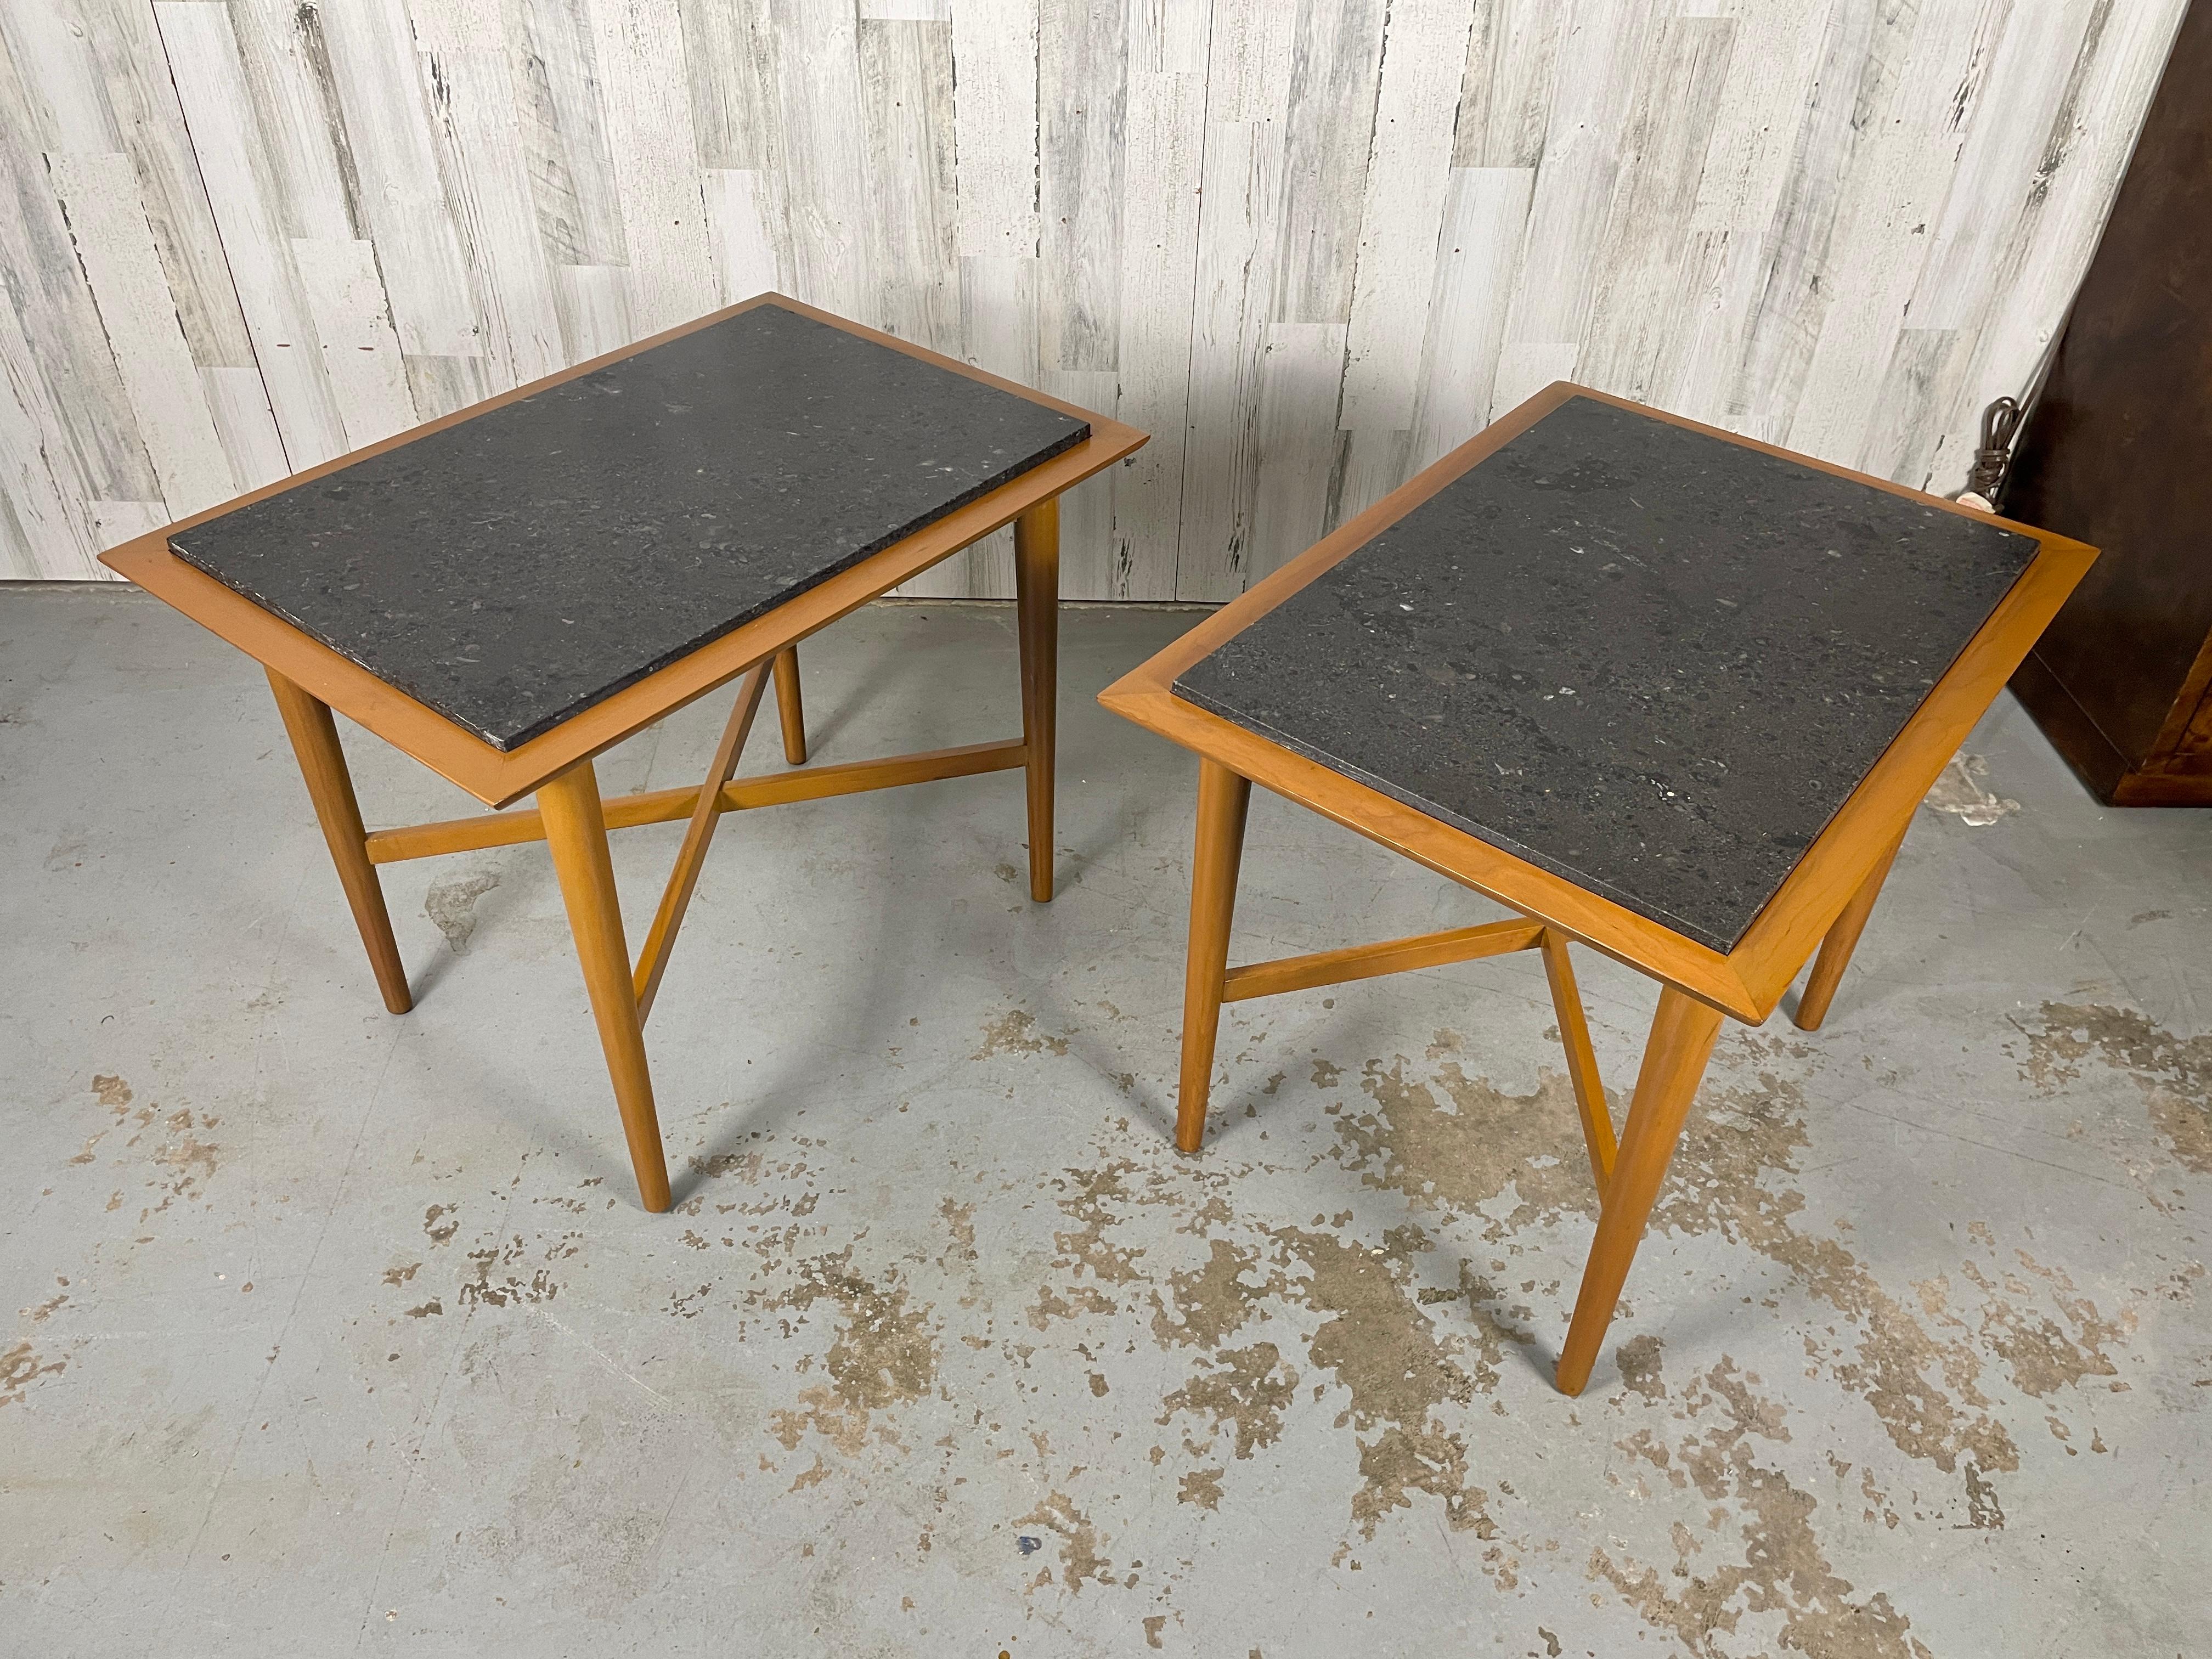 Wooden X Base Granite Top Side Tables In Good Condition For Sale In Denton, TX